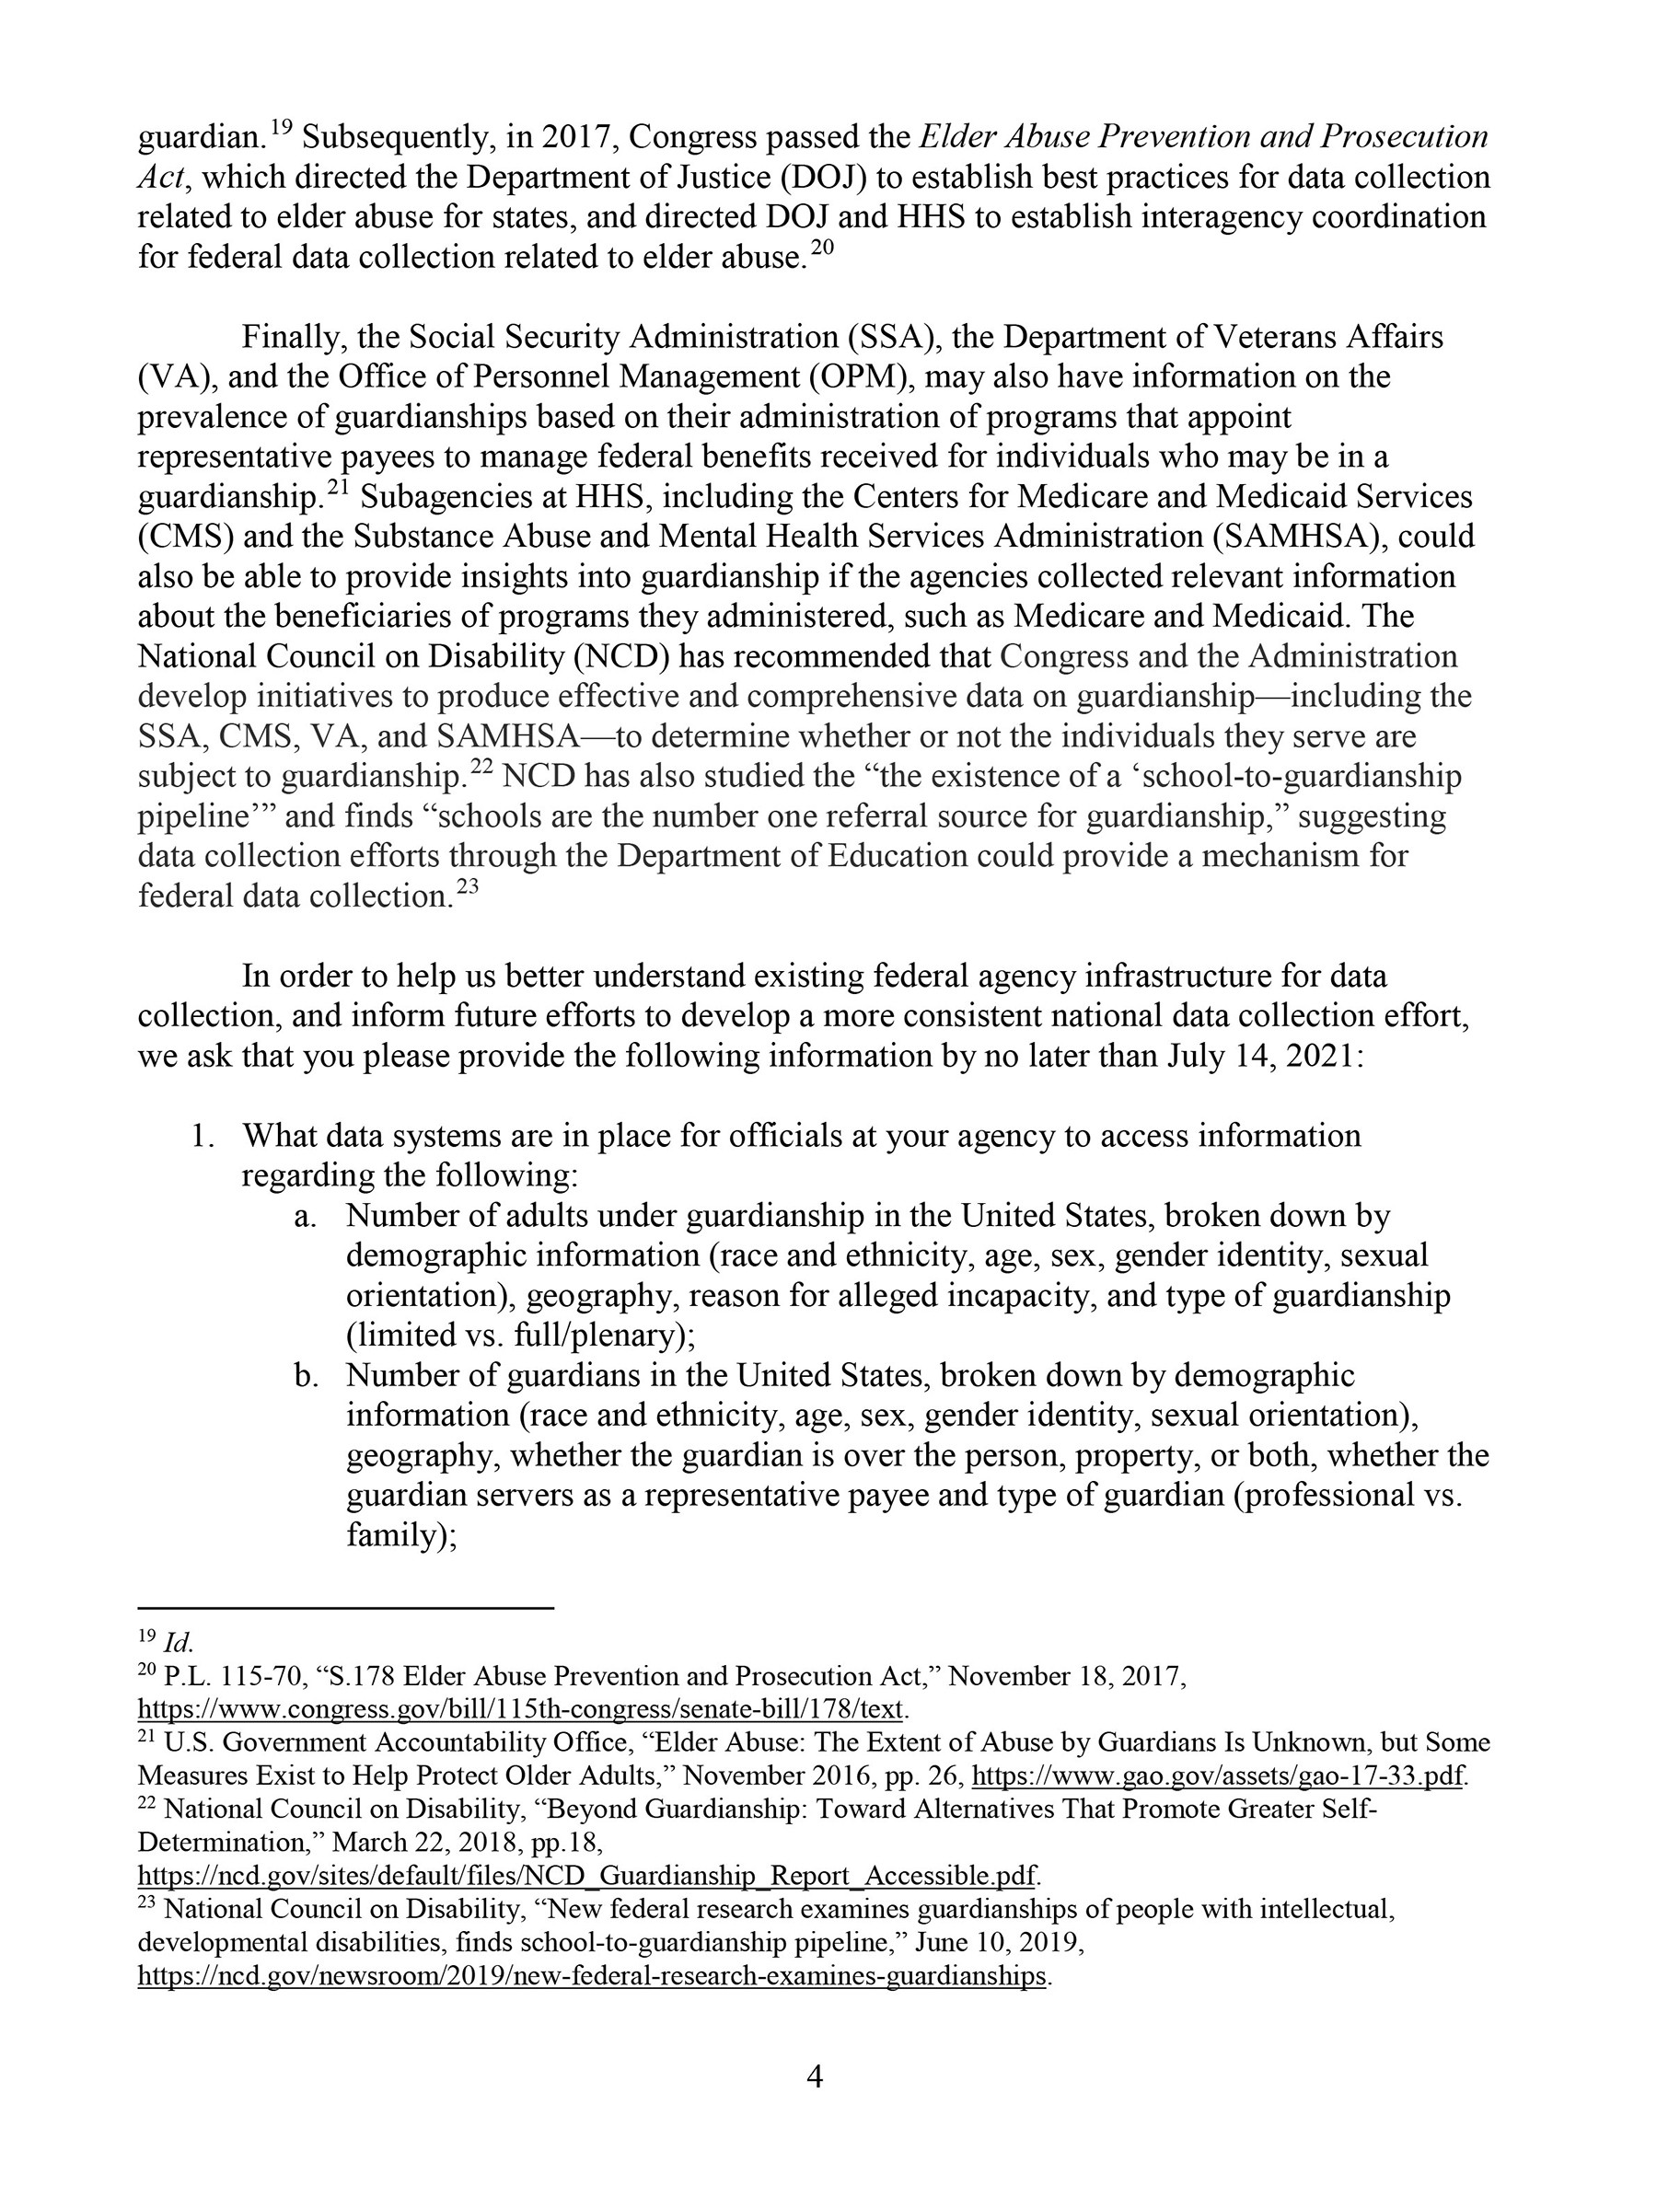 A letter Sens. Elizabeth Warren and Bob Casey sent to HHS and DOJ calling for more data on guardianships in the U.S.